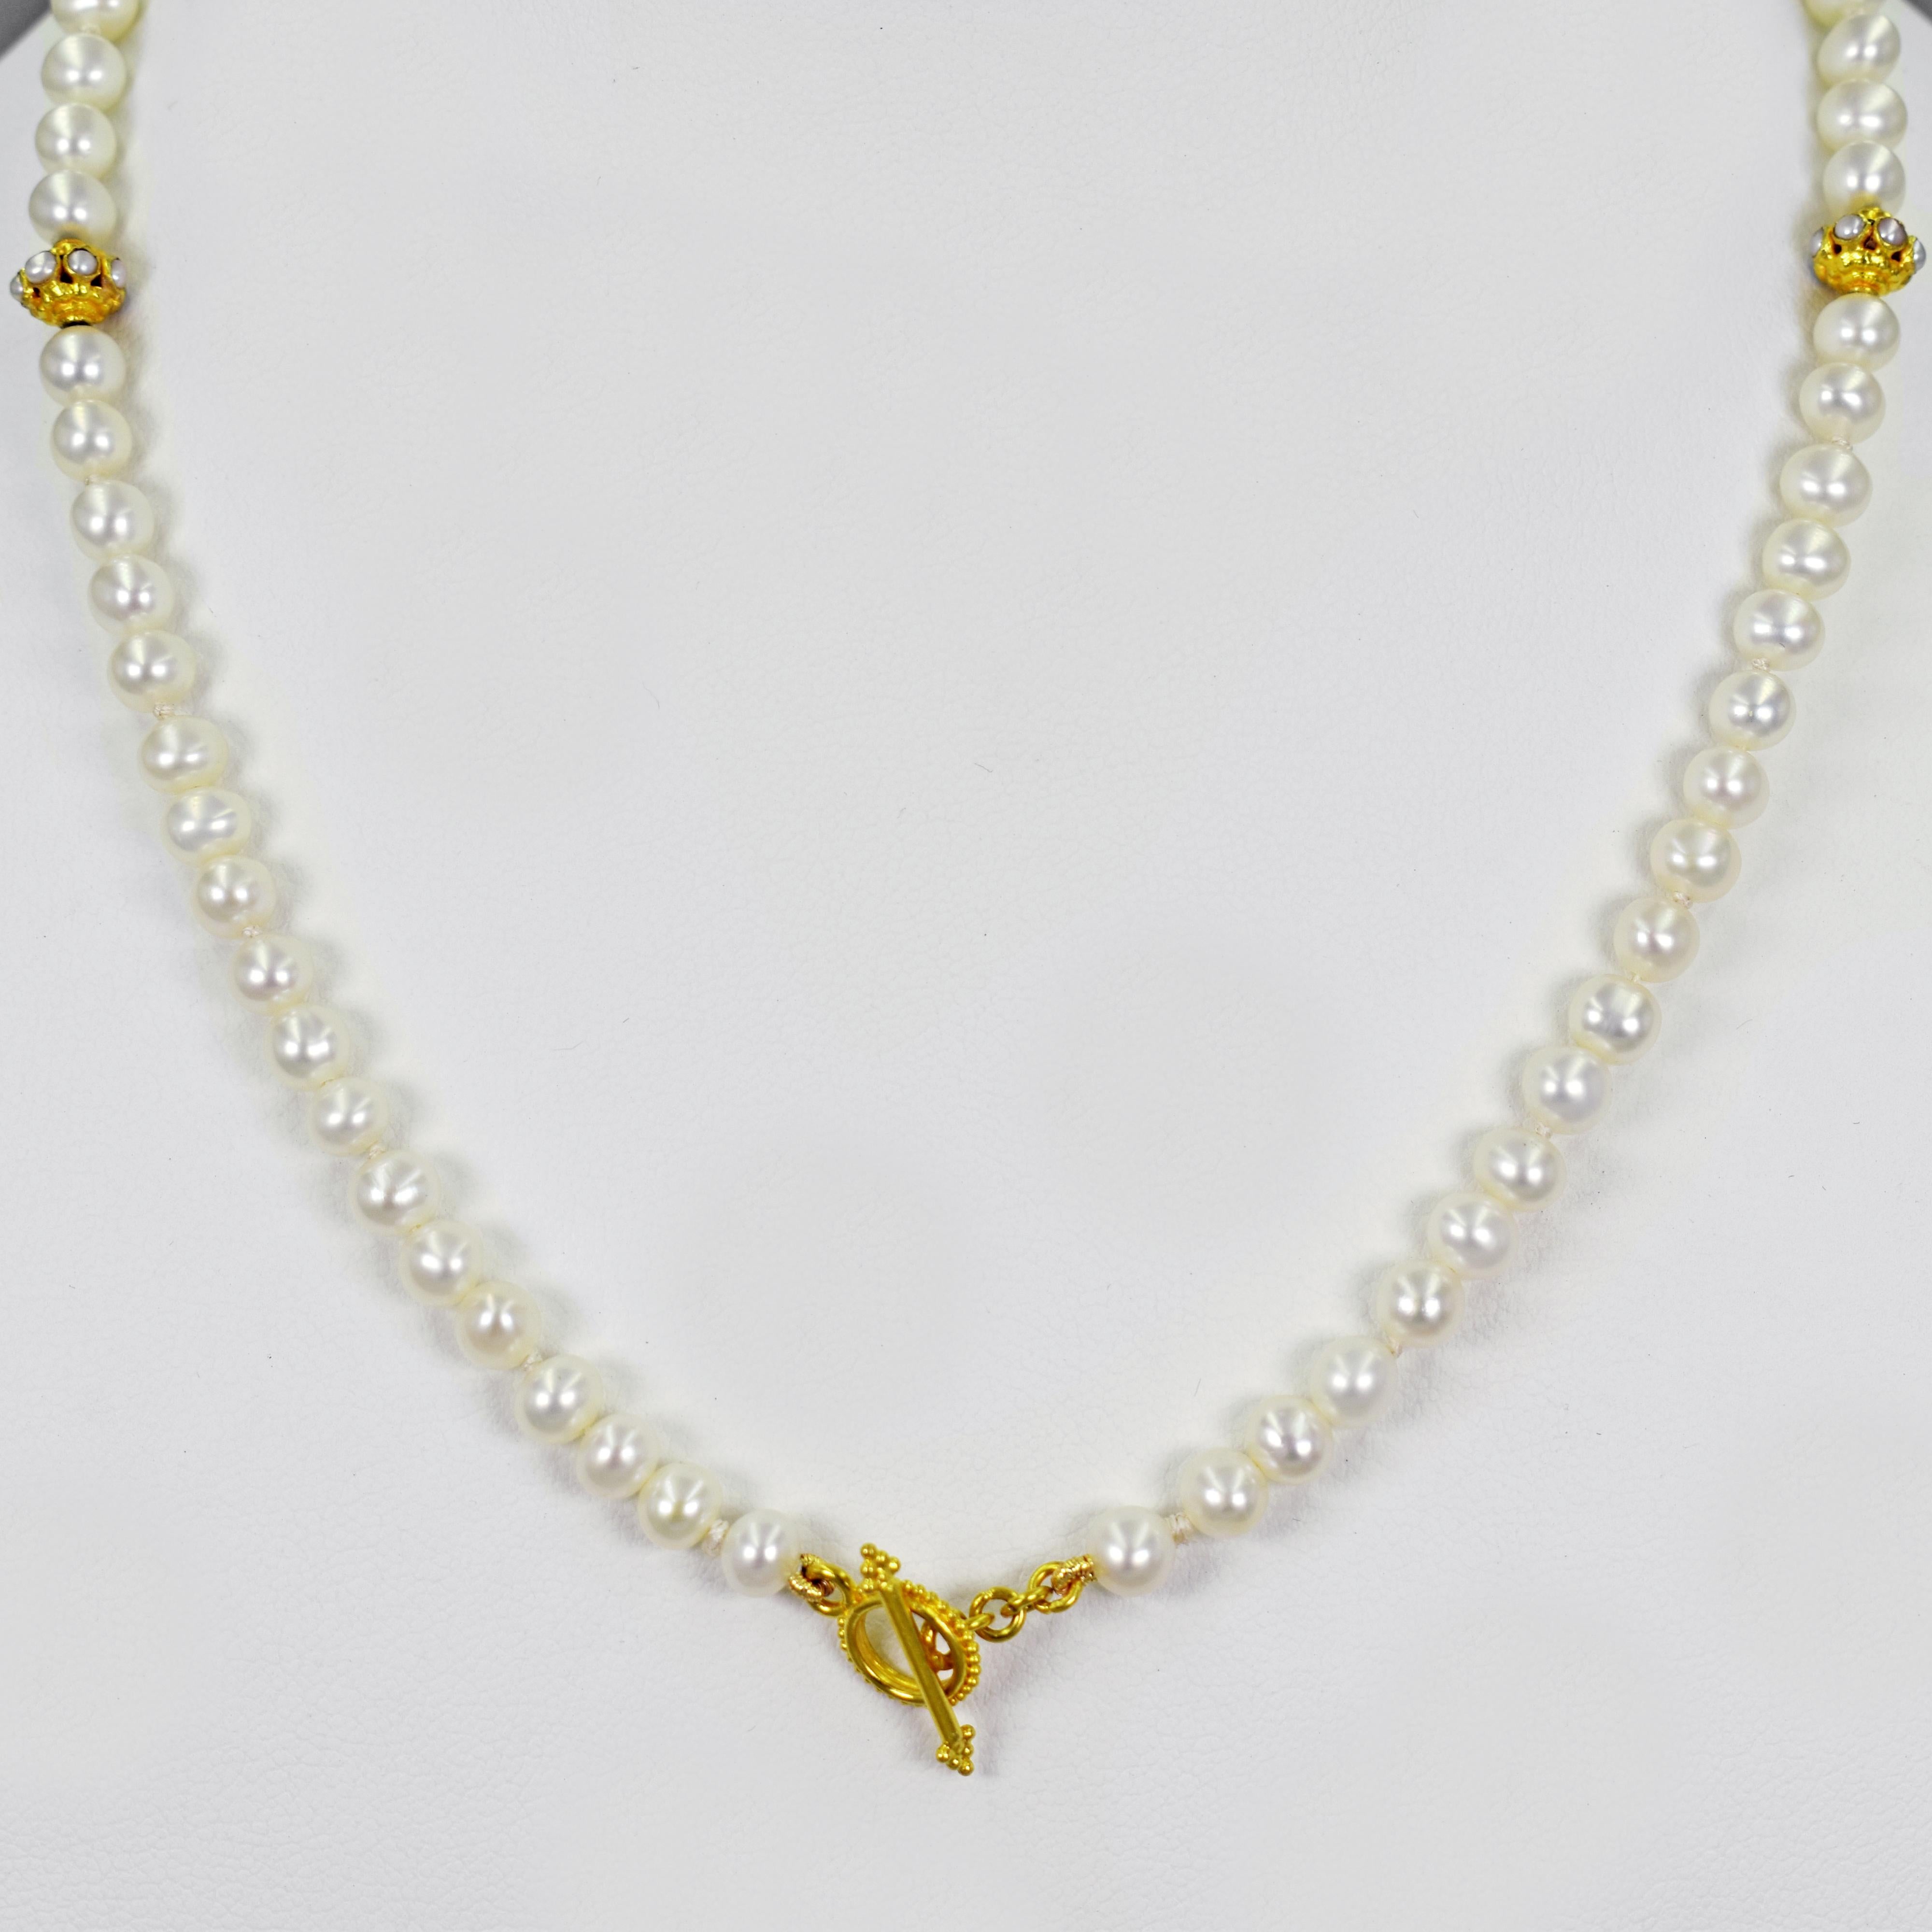 freshwater pearl and gold bead necklace